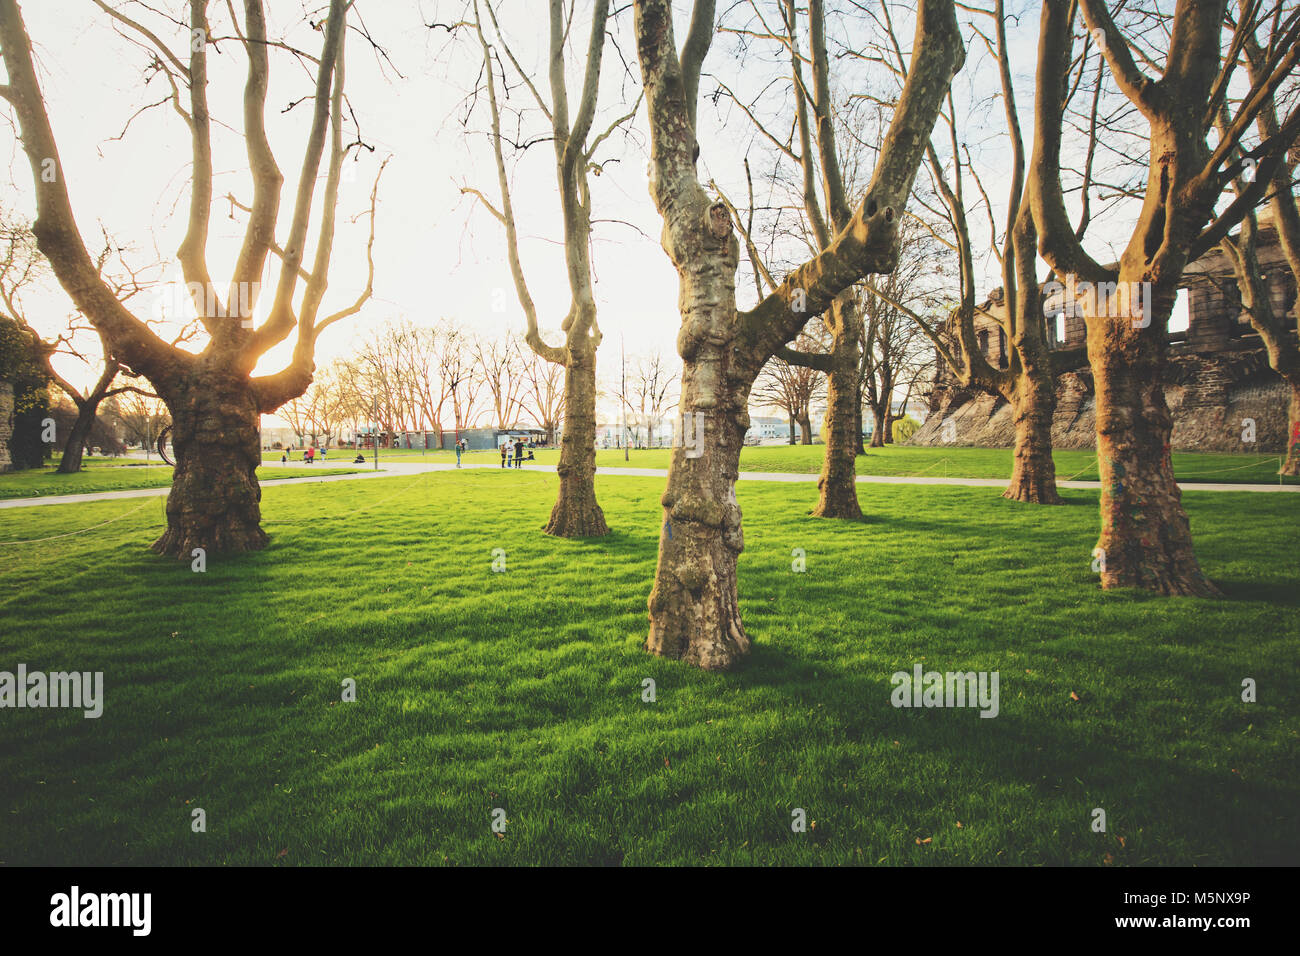 Old trees with fresh green grass in a scenic public park in beautiful golden evening light at sunset Stock Photo